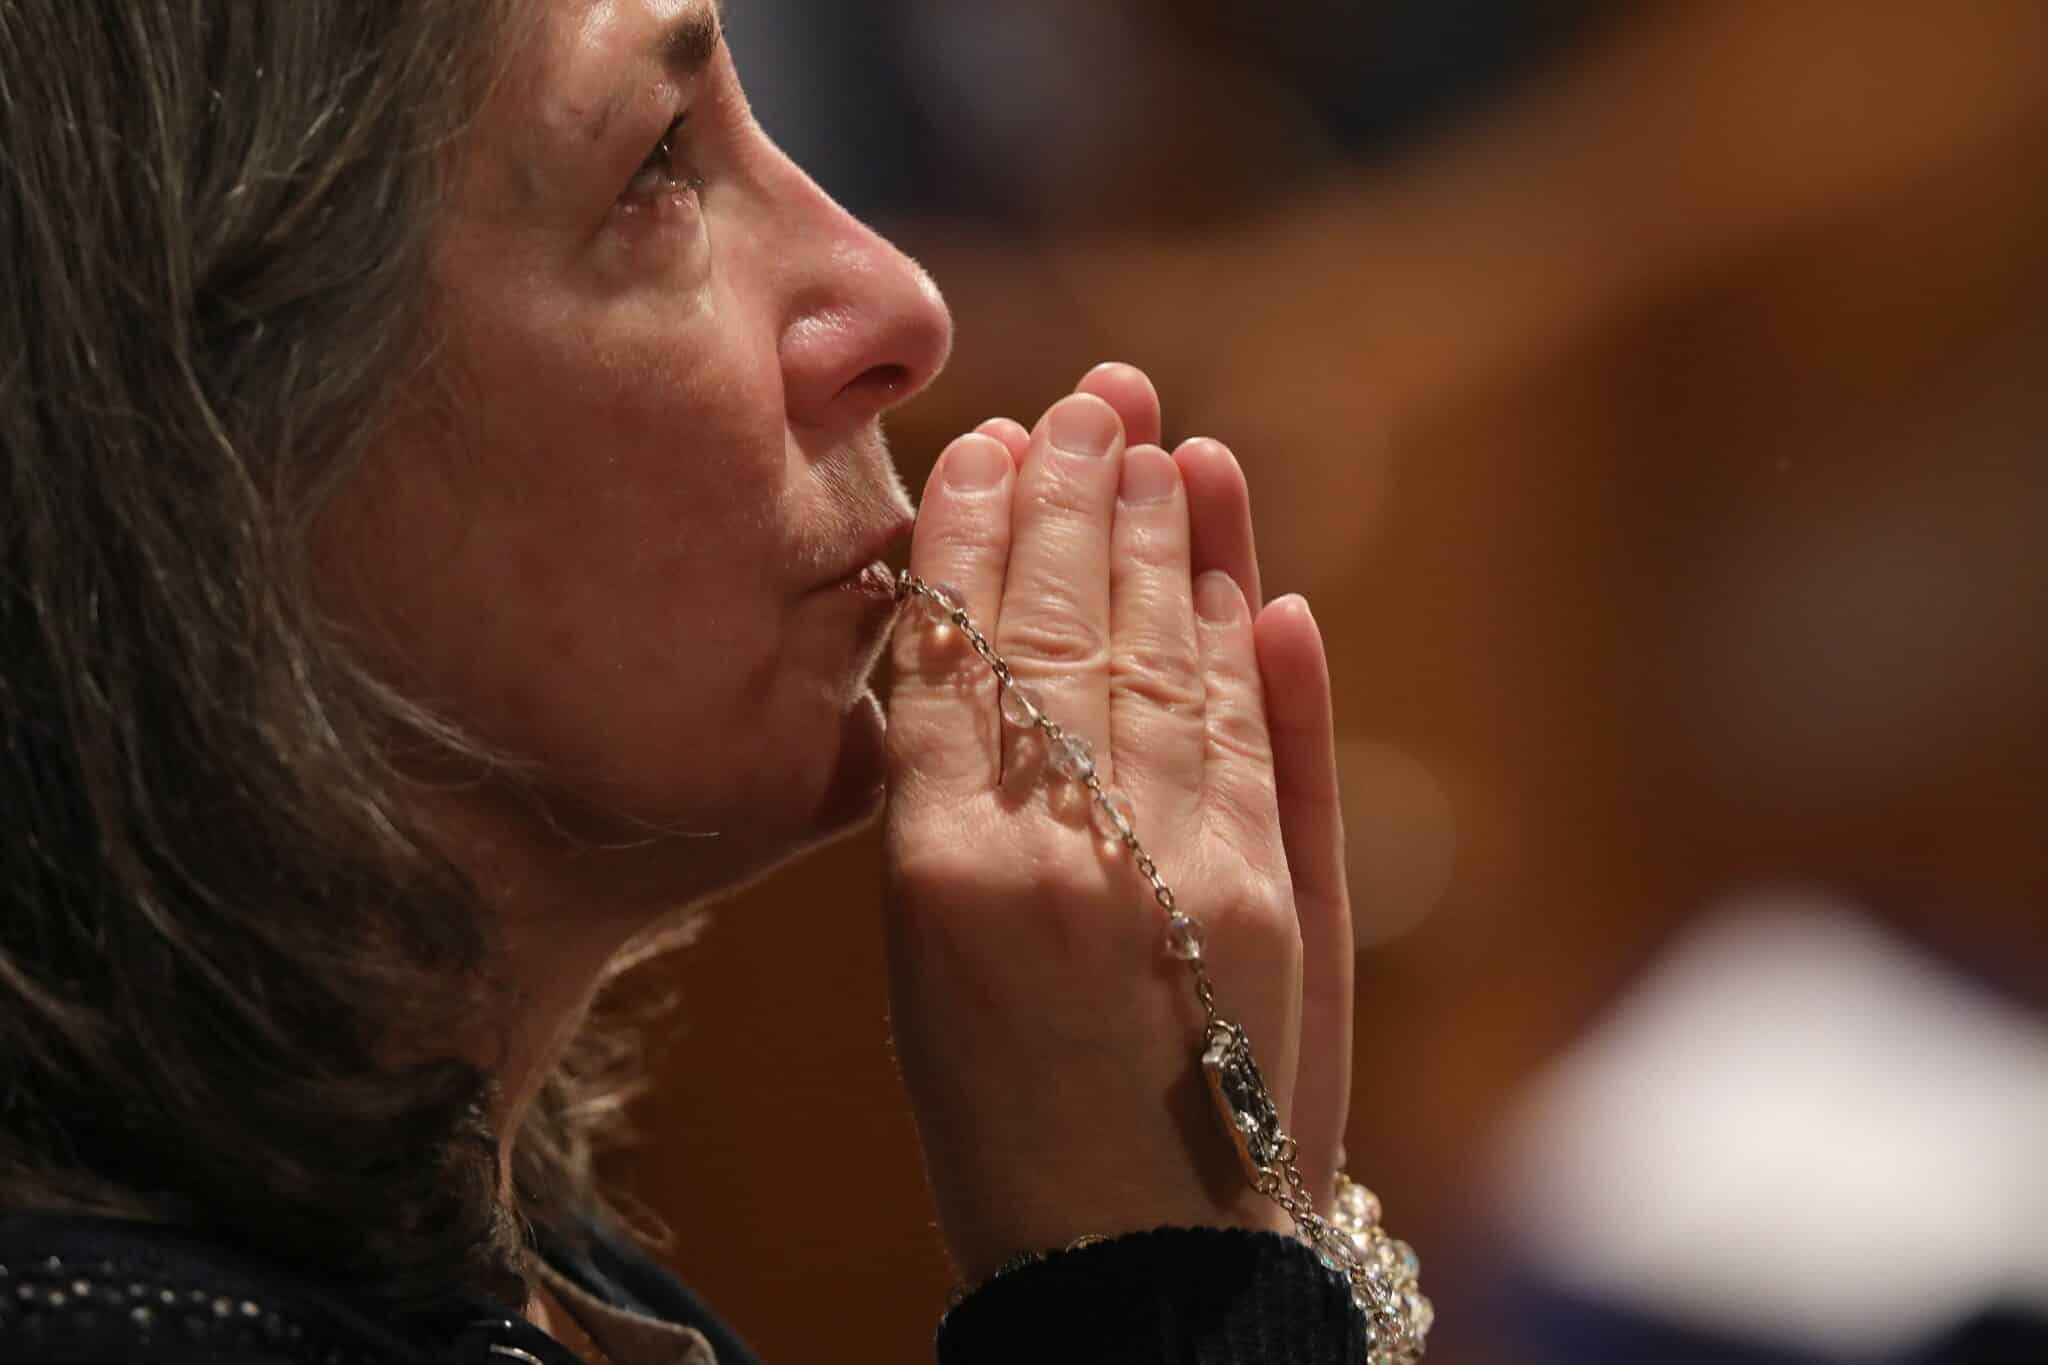 A woman becomes emotional as she prays with a rosary during Eucharistic adoration following the opening Mass of the National Prayer Vigil for Life Jan. 19, 2023, at the Basilica of the National Shrine of the Immaculate Conception in Washington. (OSV News photo/Bob Roller)